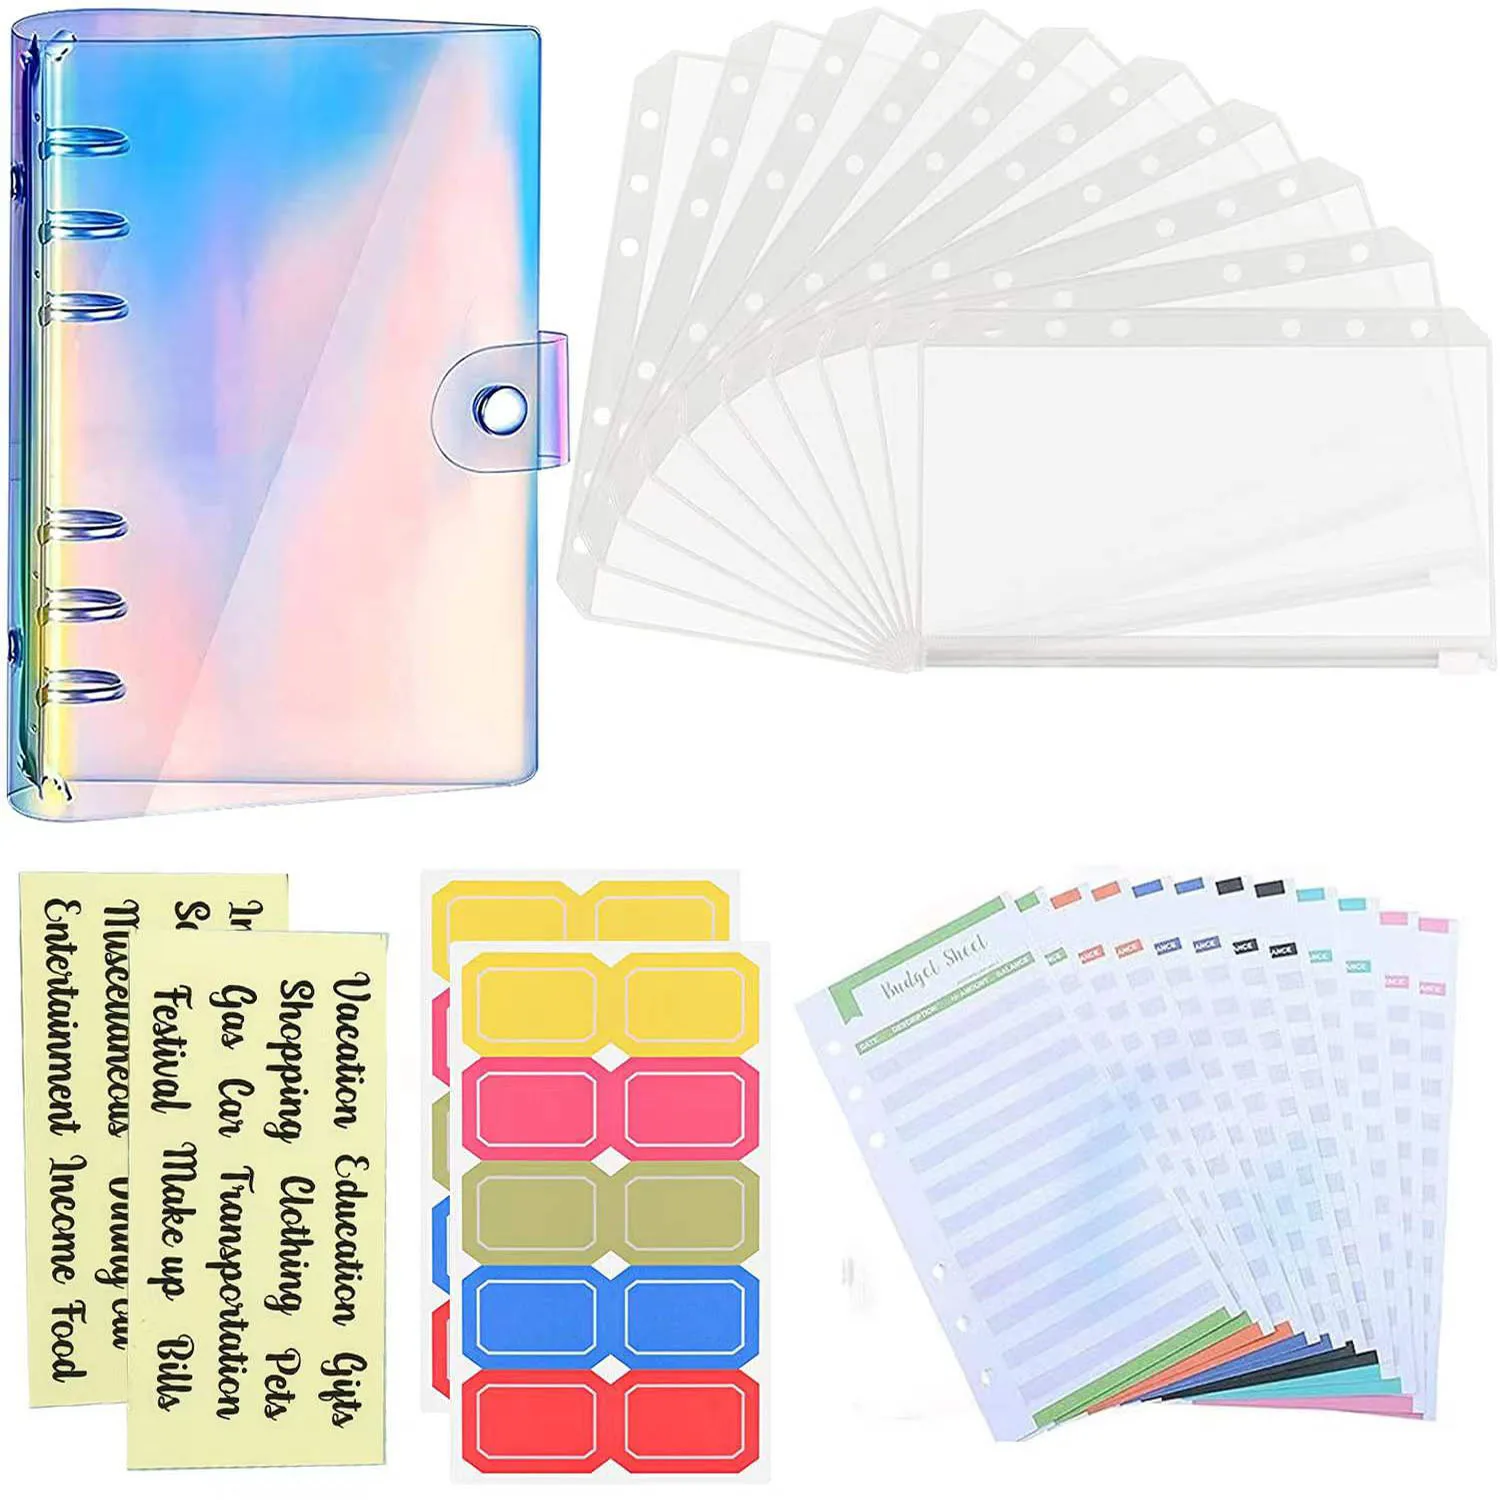 A6 Budget Binder Waterproof Cash Envelopes Notebook Organizer System with 10 Zipper Pockets,12 Budget Sheet and Label Stickers 12 pieces a5 size pvc 6 holes binder budget zipper pockets wallet waterproof document bag for a5 binder notebook filing bags